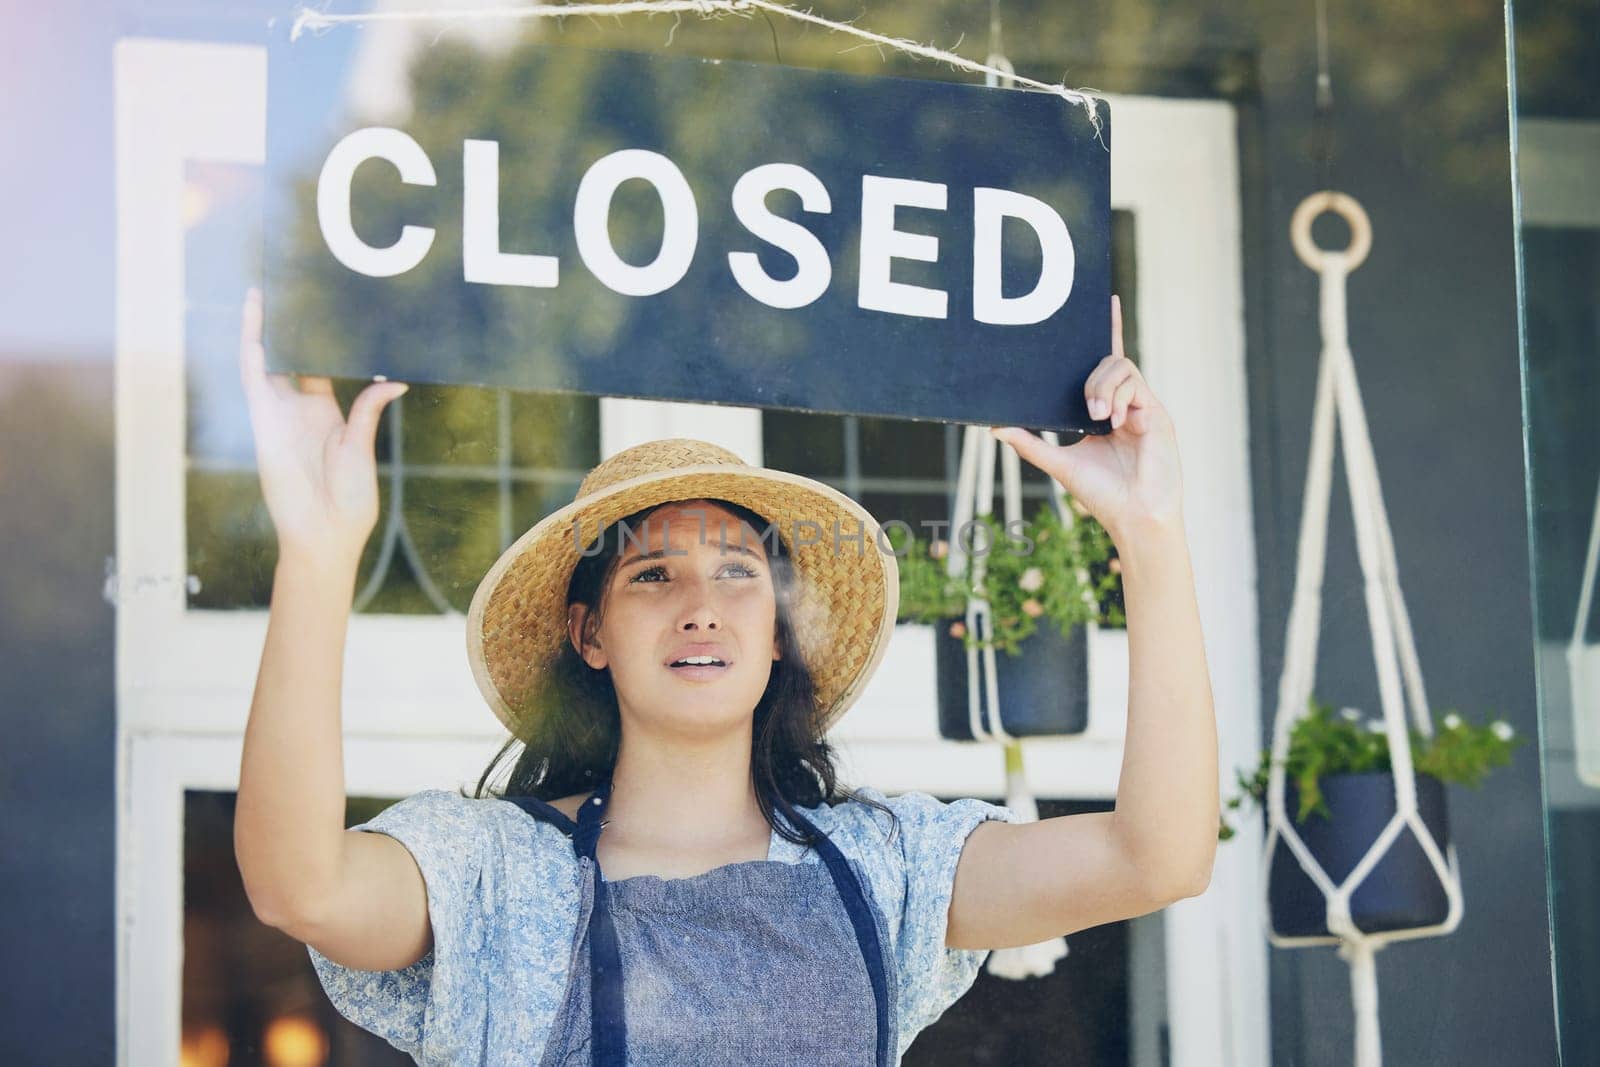 Closed, woman and floral business with sign, recession and inflation with bankruptcy, emotion and failure. Person, entrepreneur or worker with unemployment, stagflation or stress with store or upset.